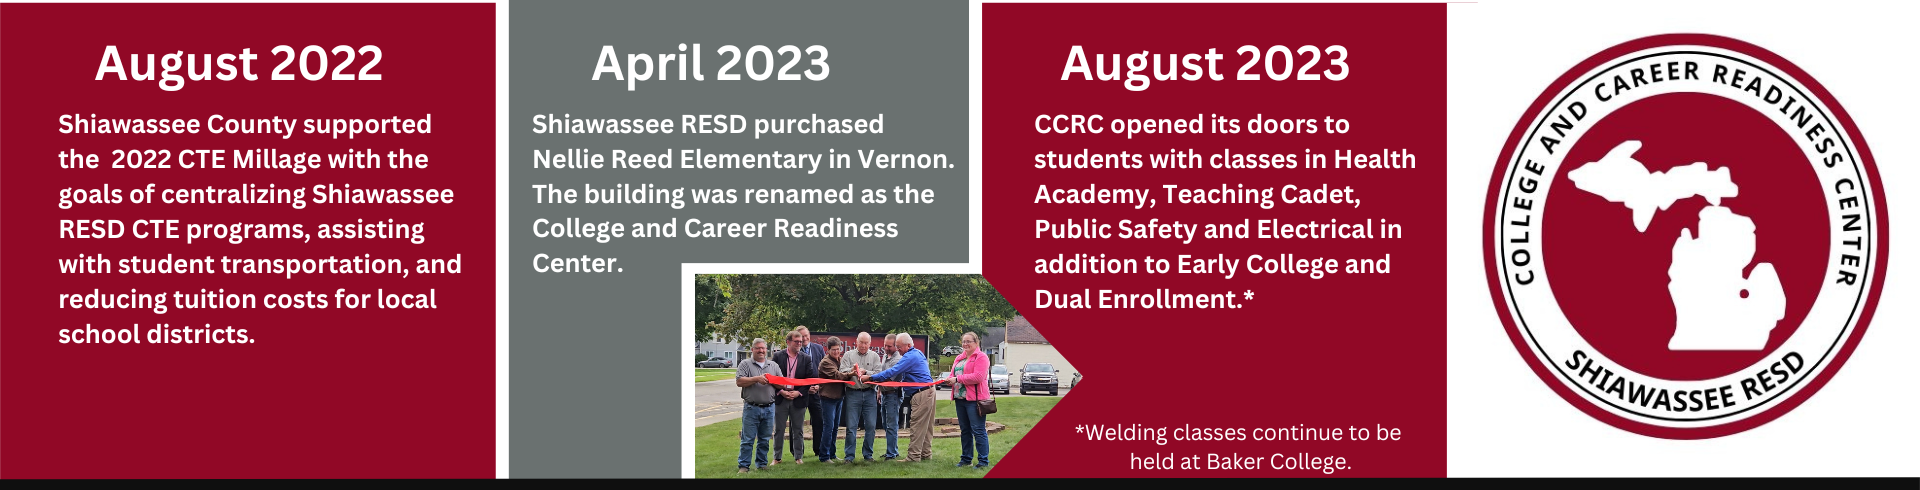 History of College and Career Readiness Center, Funding approved August 22, opens August 2023